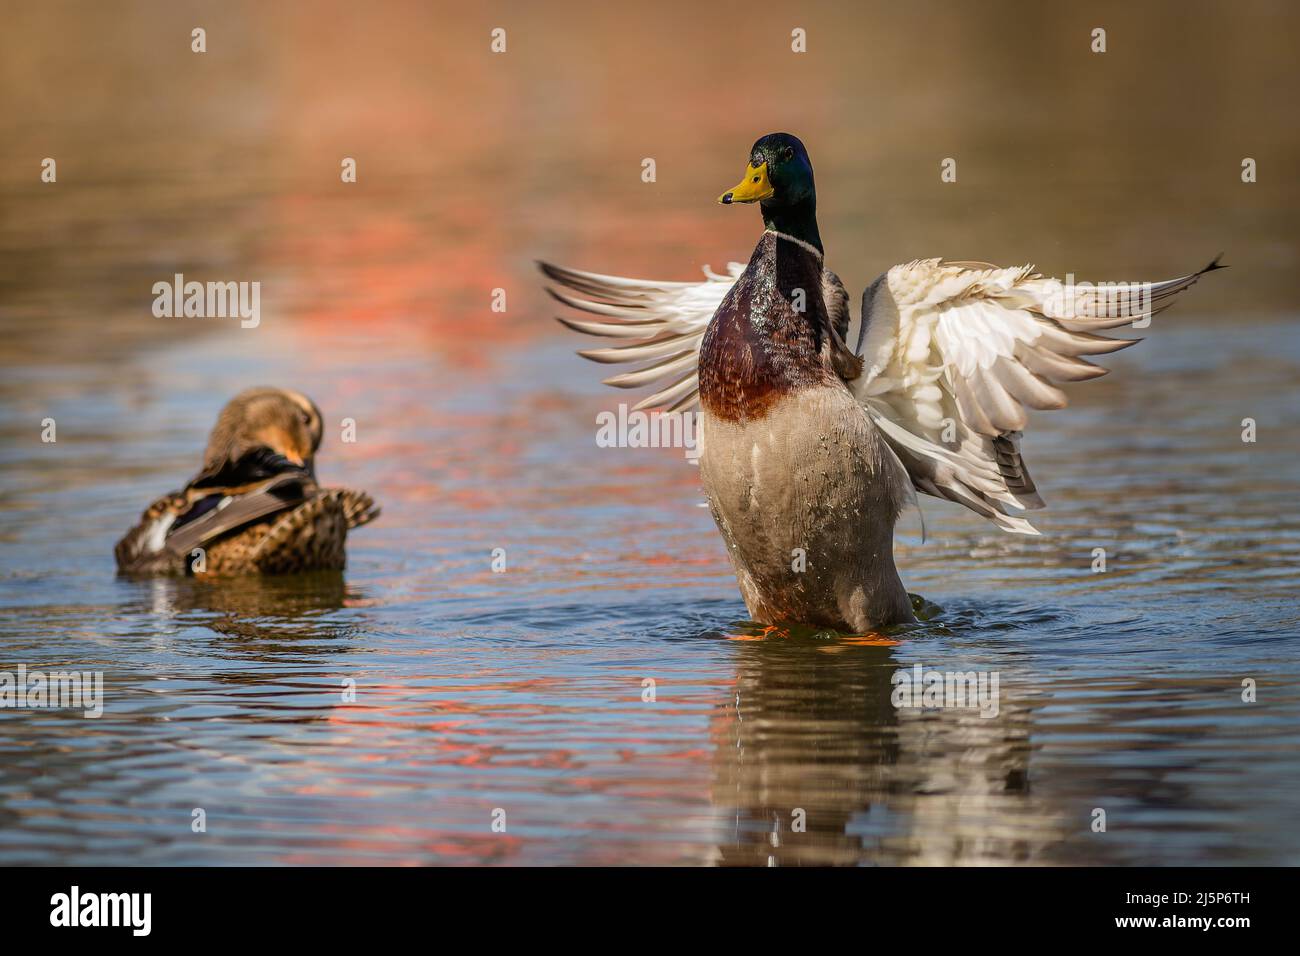 A male mallard duck, a drake, with green head and yellow beak standing in blue water waving its wings reminding of an angel. A female duck next to him Stock Photo